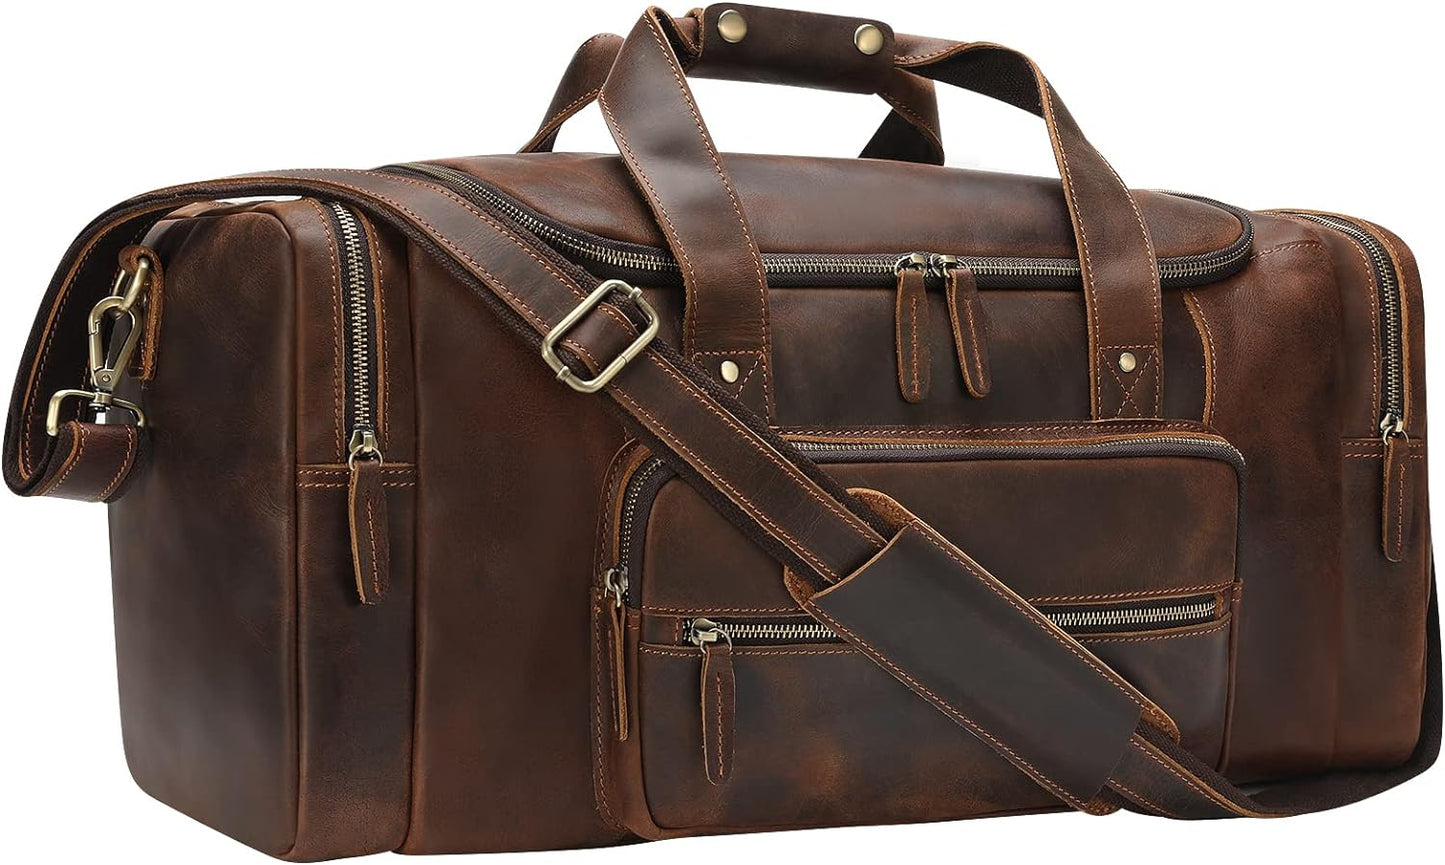 Leather Travel Duffel Bags Carry On Weekender Overnight Bag